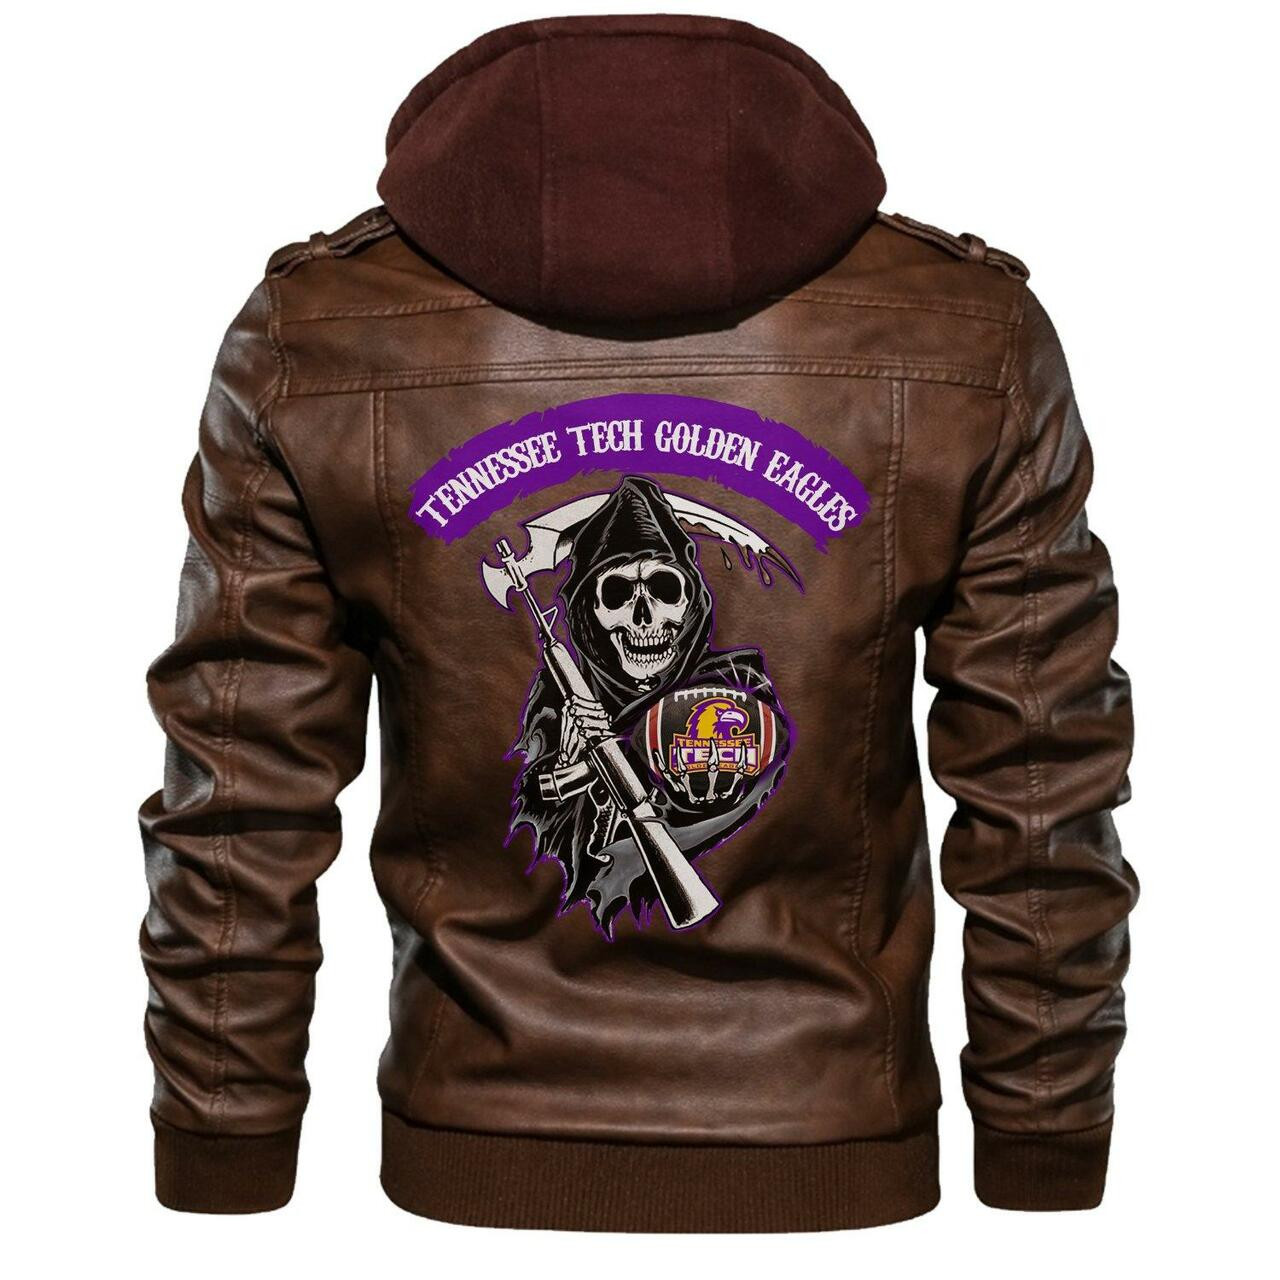 Don't wait another minute, Get Hot Leather Jacket today 139